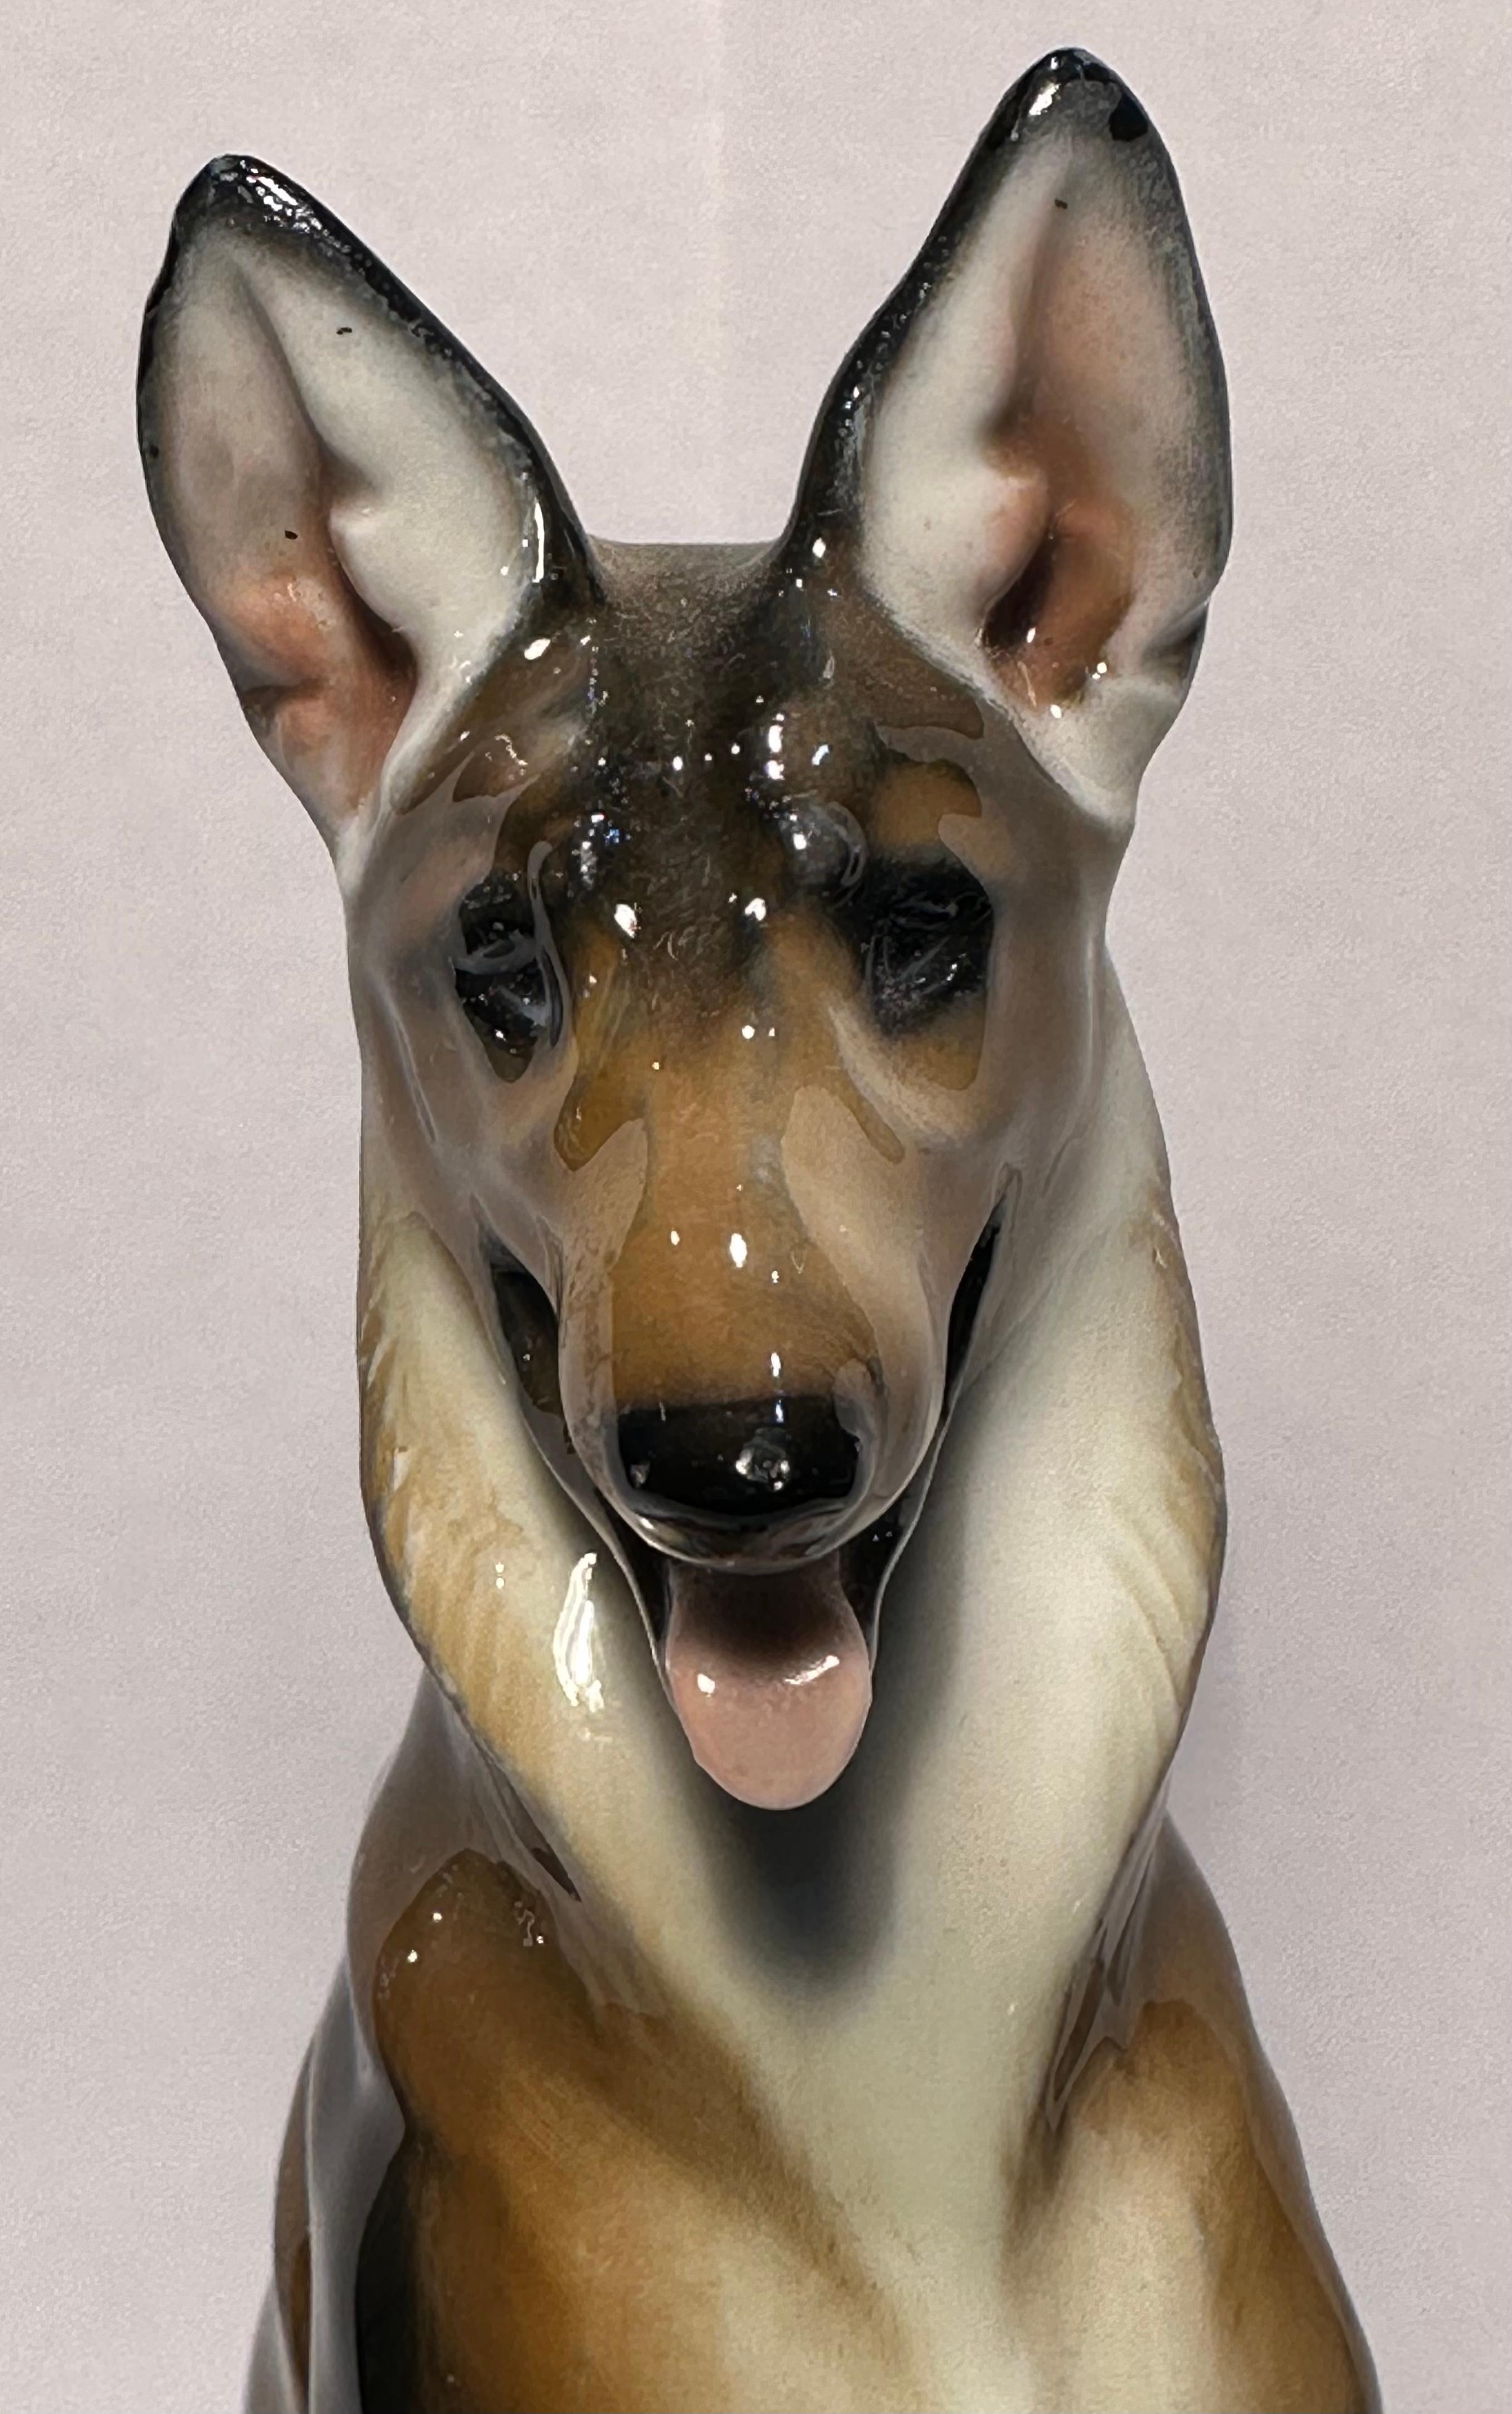 Finest quality, vintage retired, handmade and hand painted in Germany, Rosenthal porcelain German Shepherd dog figurine by artist Theodor Karner for Rosenthal Porcelain Factory. The dog has been masterfully handmade and hand painted with great